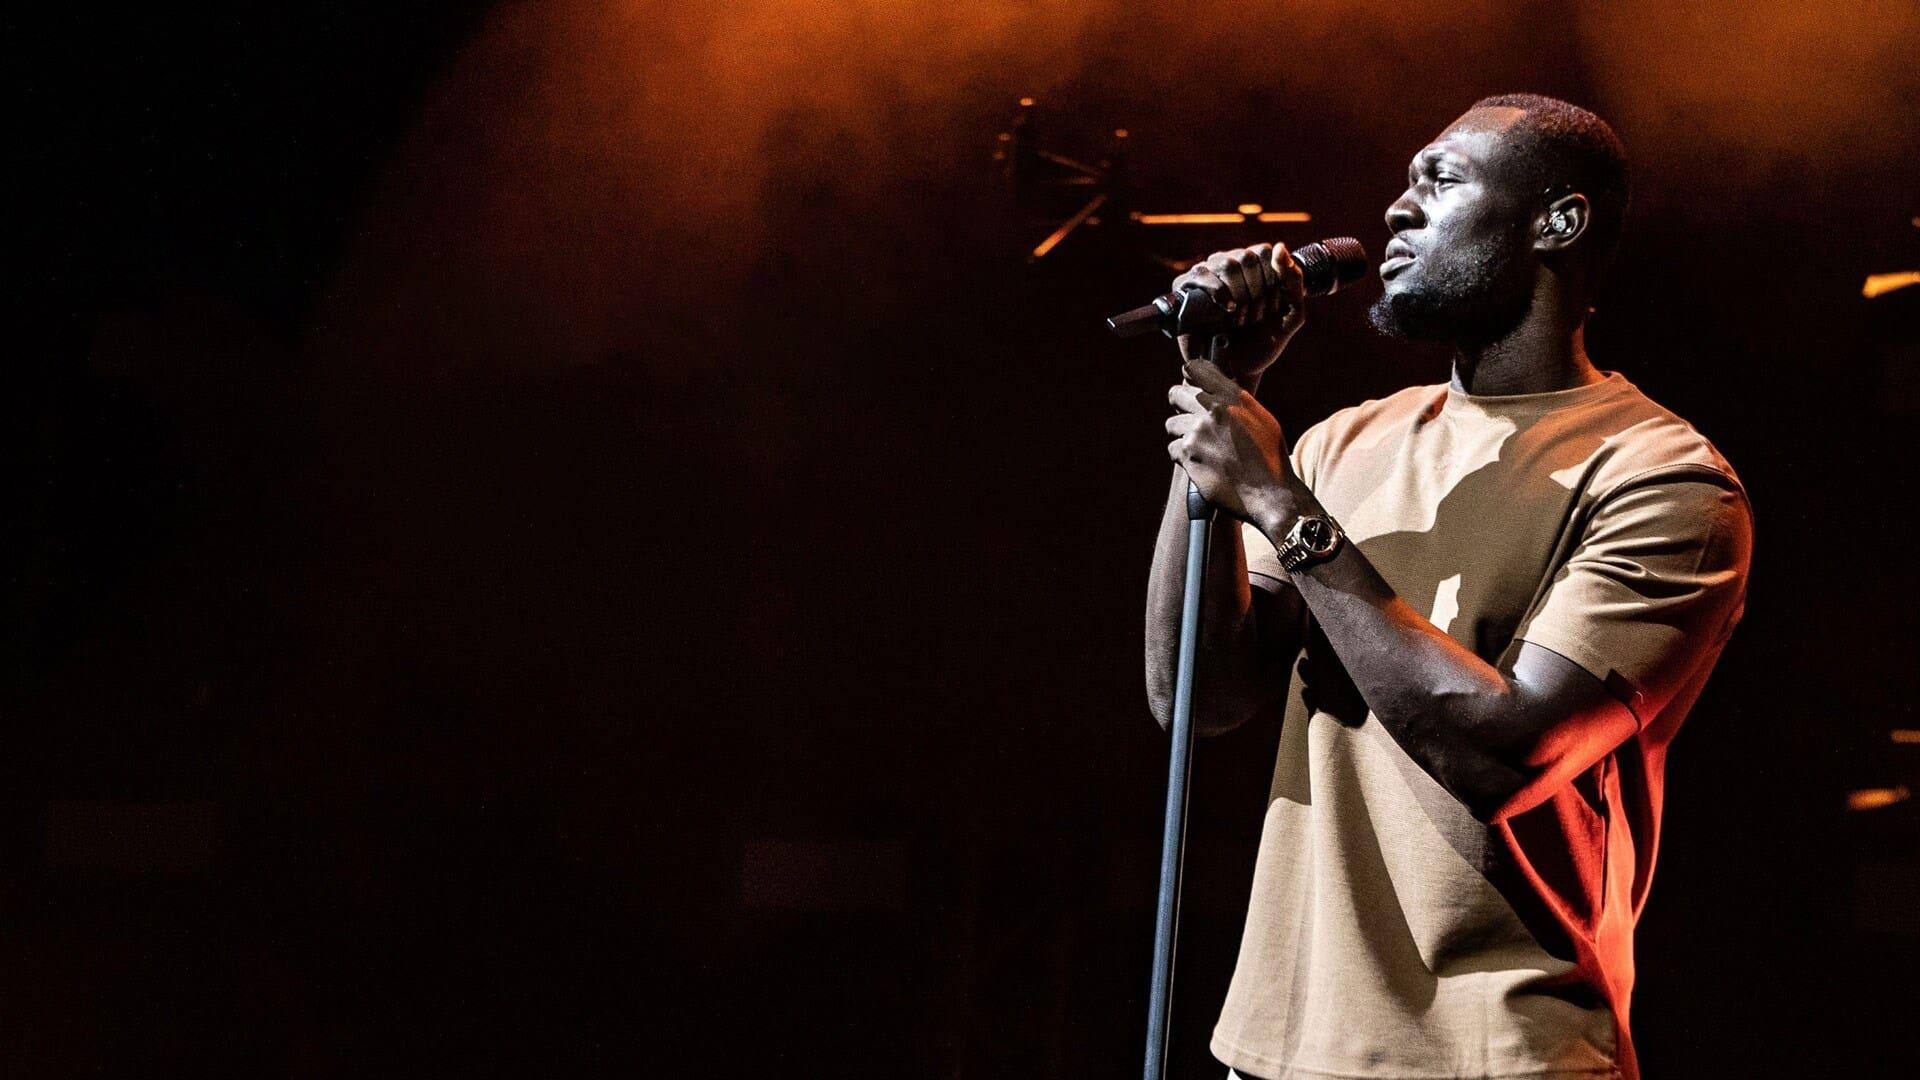 Stormzy Live in London: This Is What We Mean backdrop